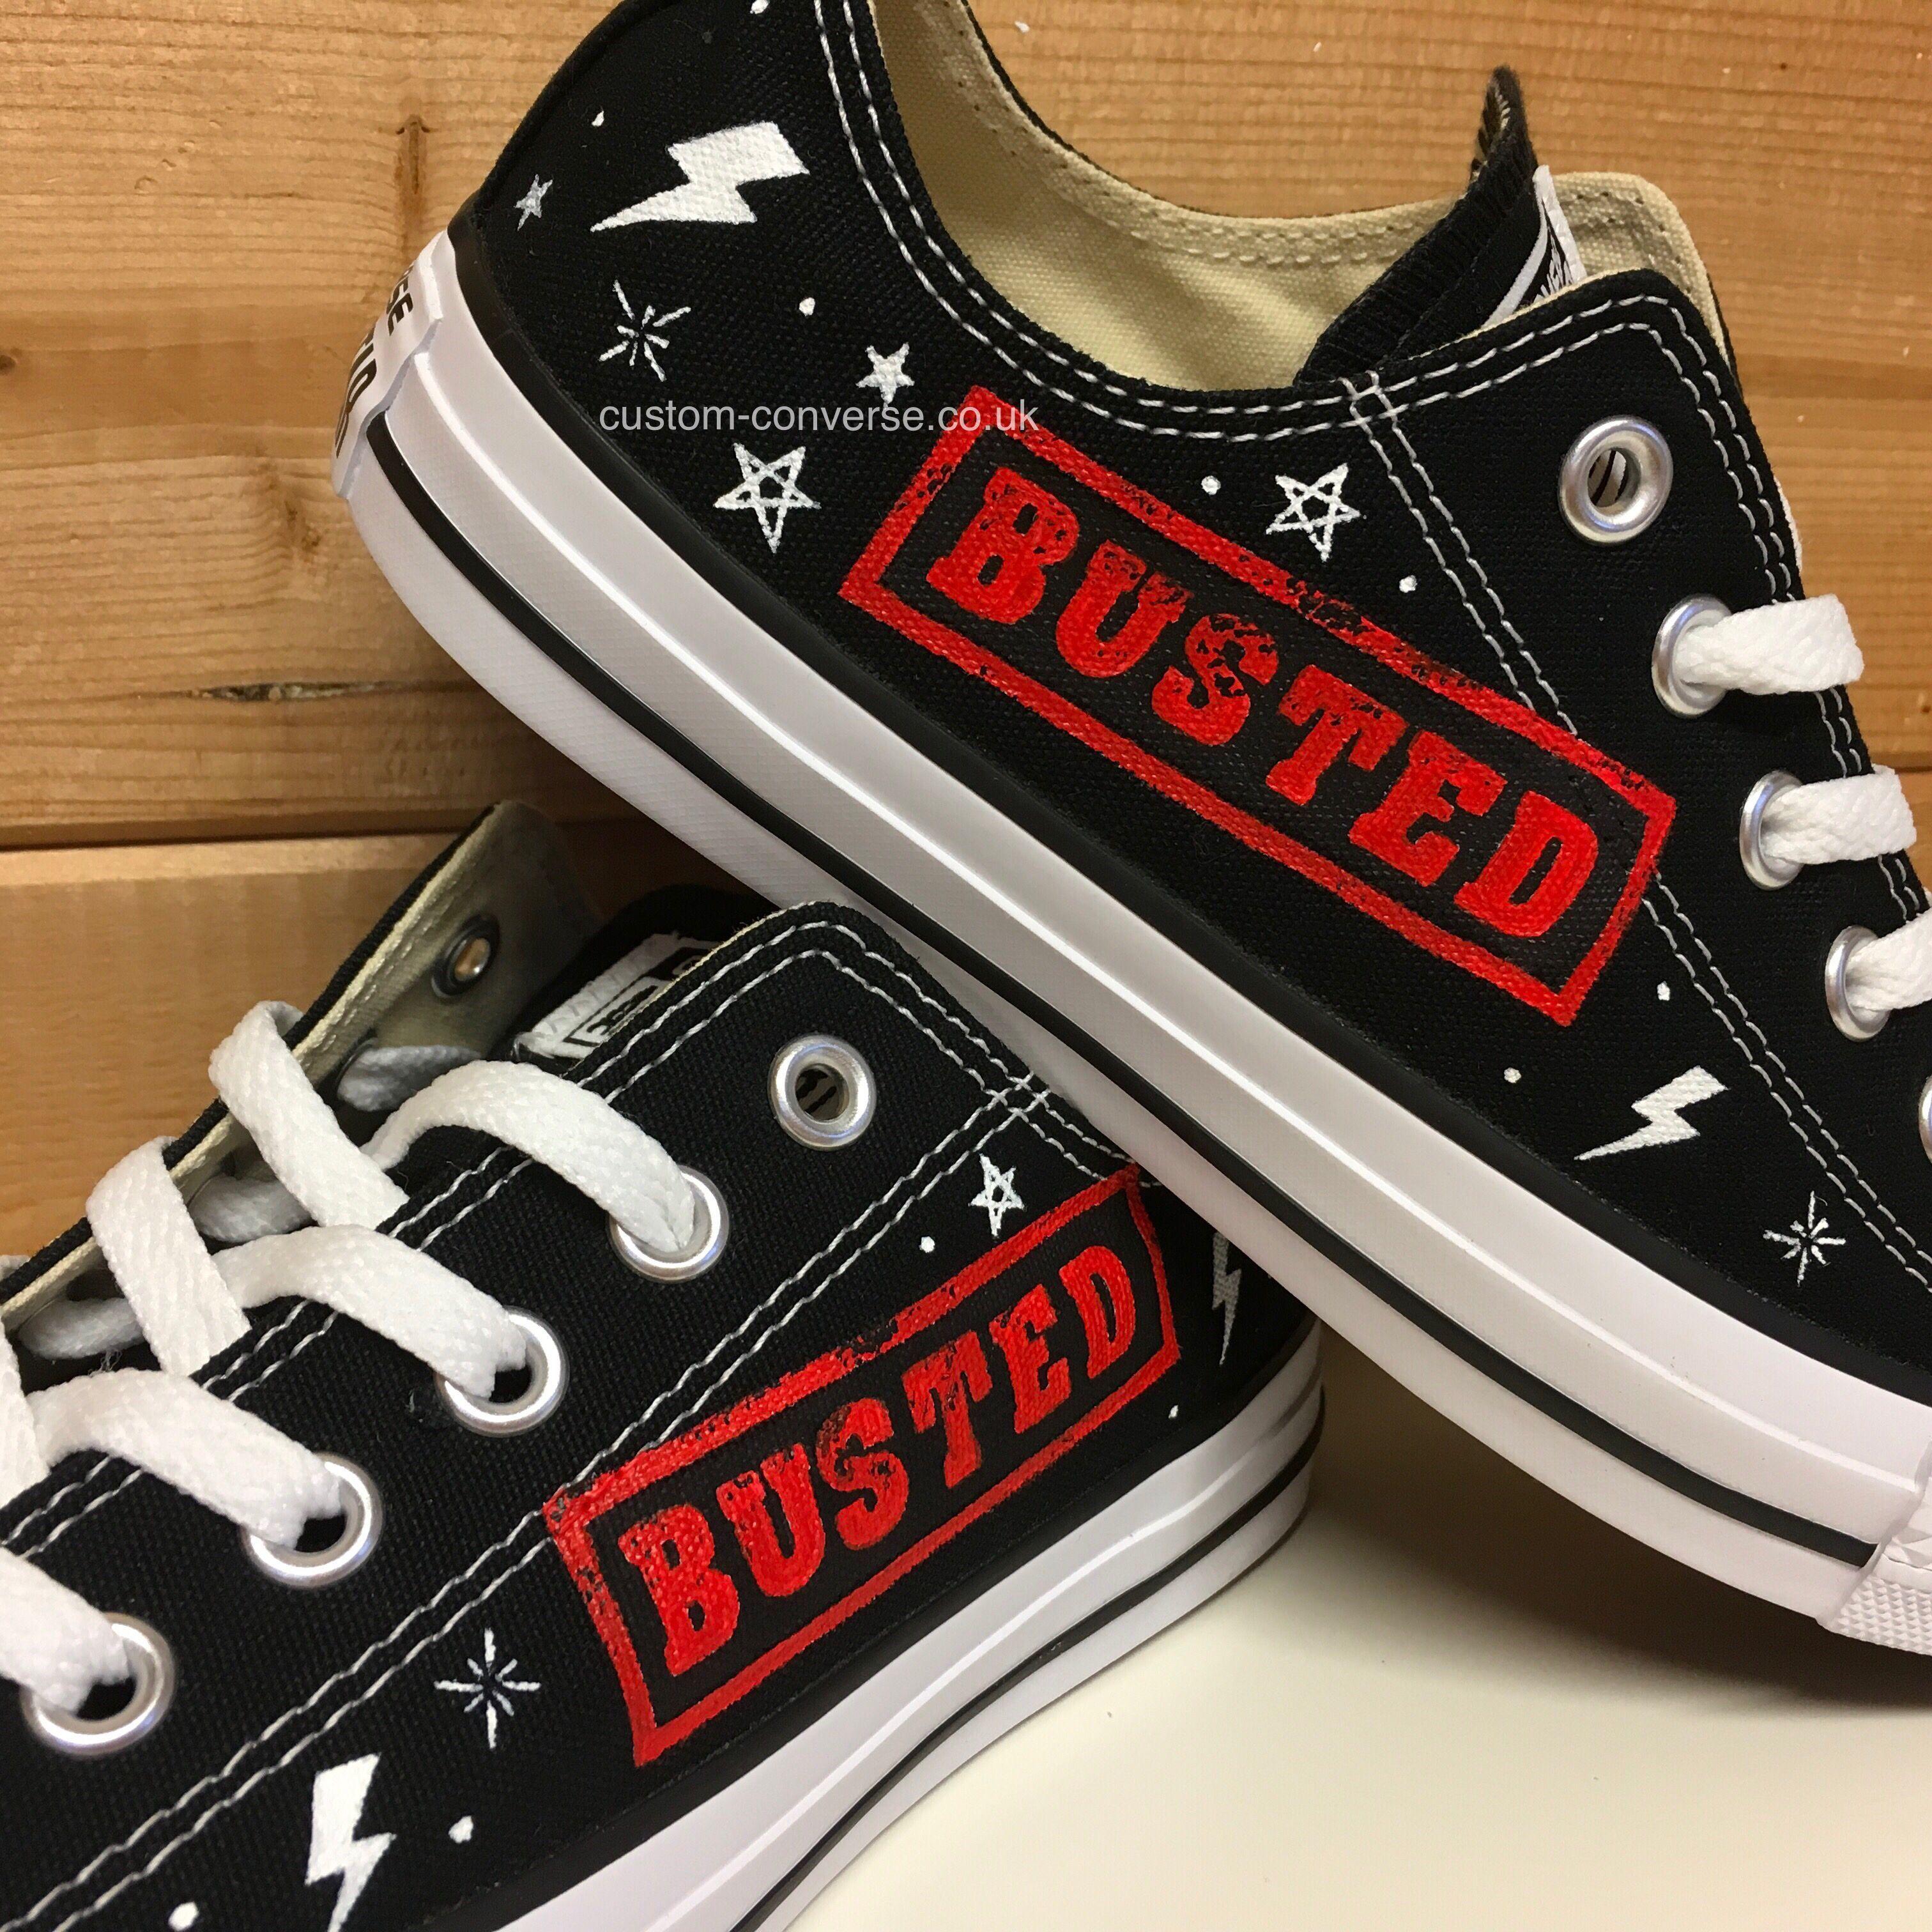 Busted Logo - Busted Low Tops in 2019 | Shoes | Busted band, Tops, Painted shoes